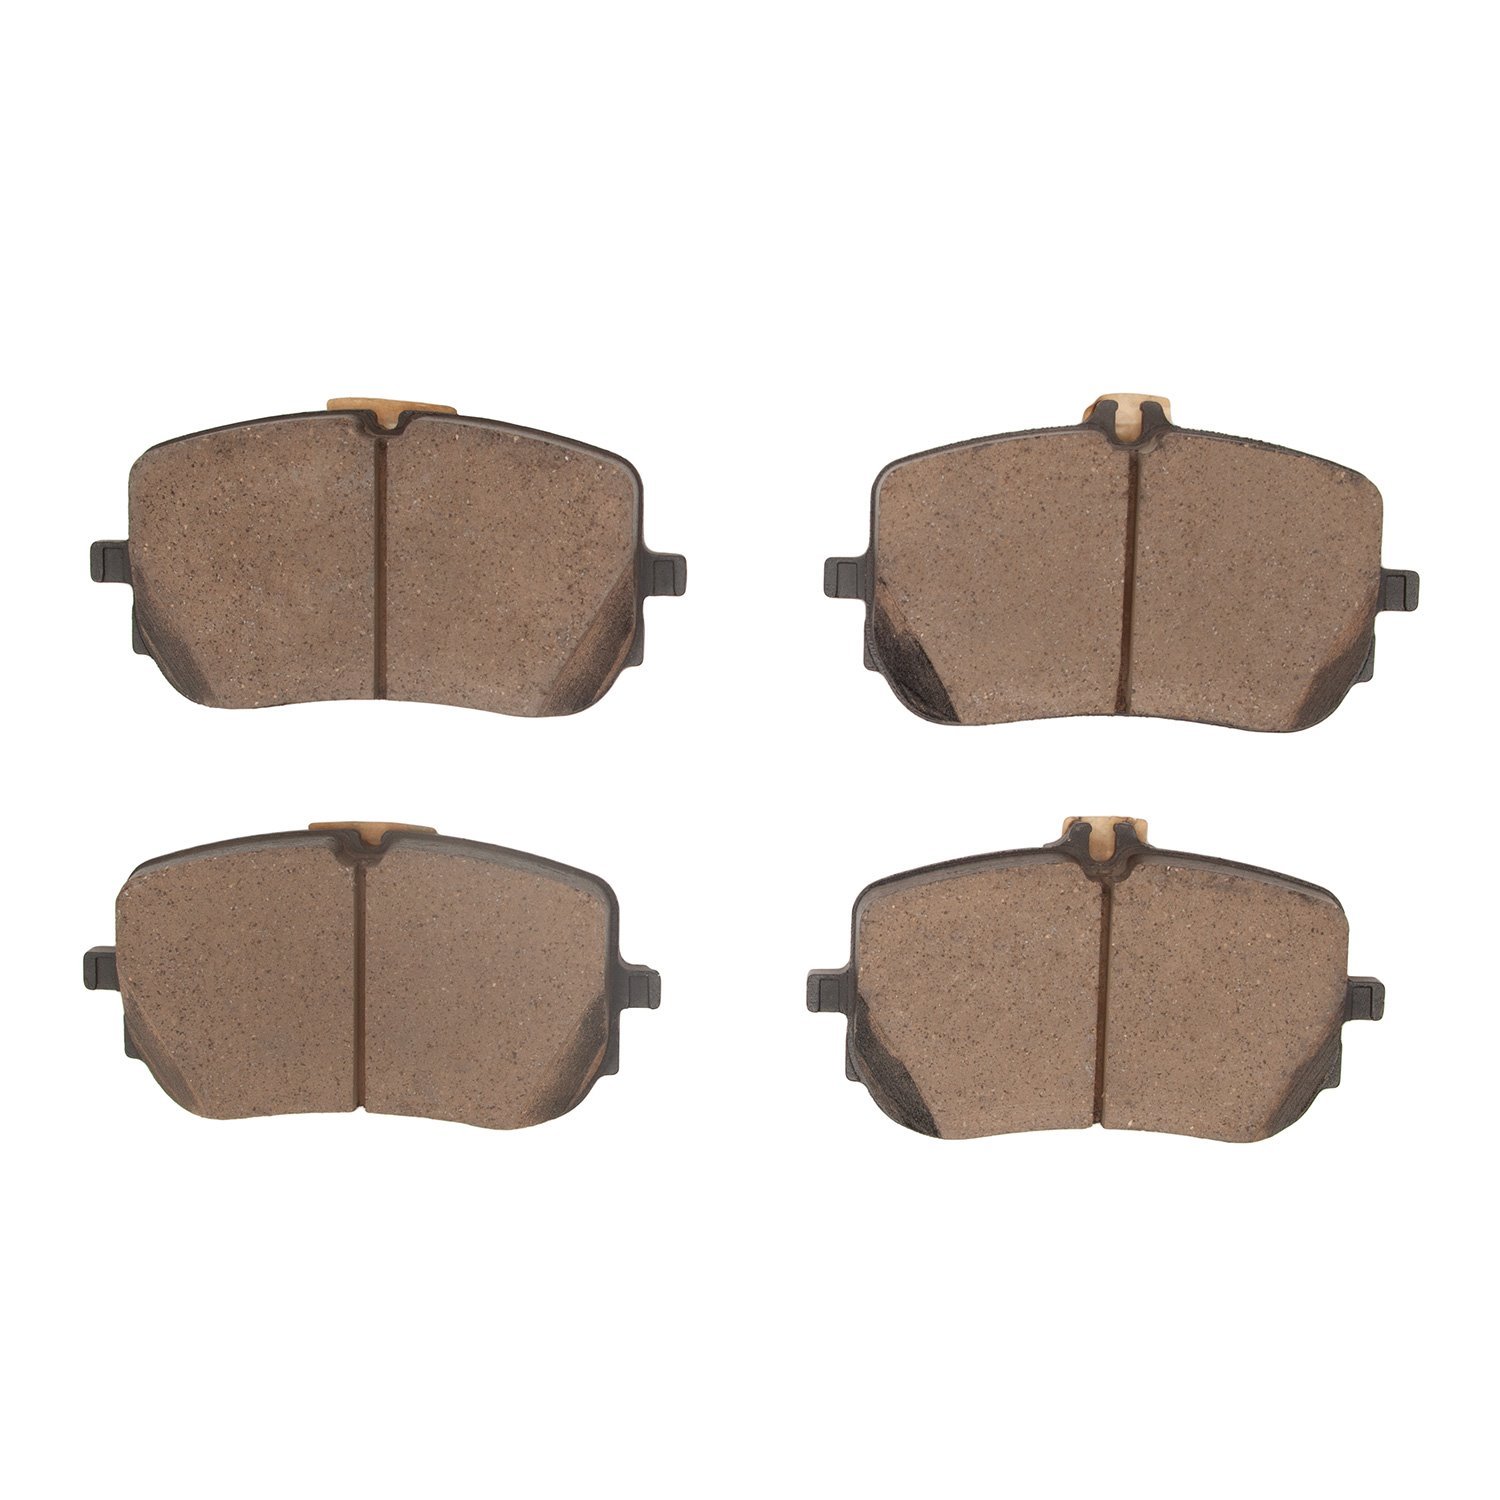 1310-2206-00 3000-Series Ceramic Brake Pads, Fits Select Mercedes-Benz, Position: Front